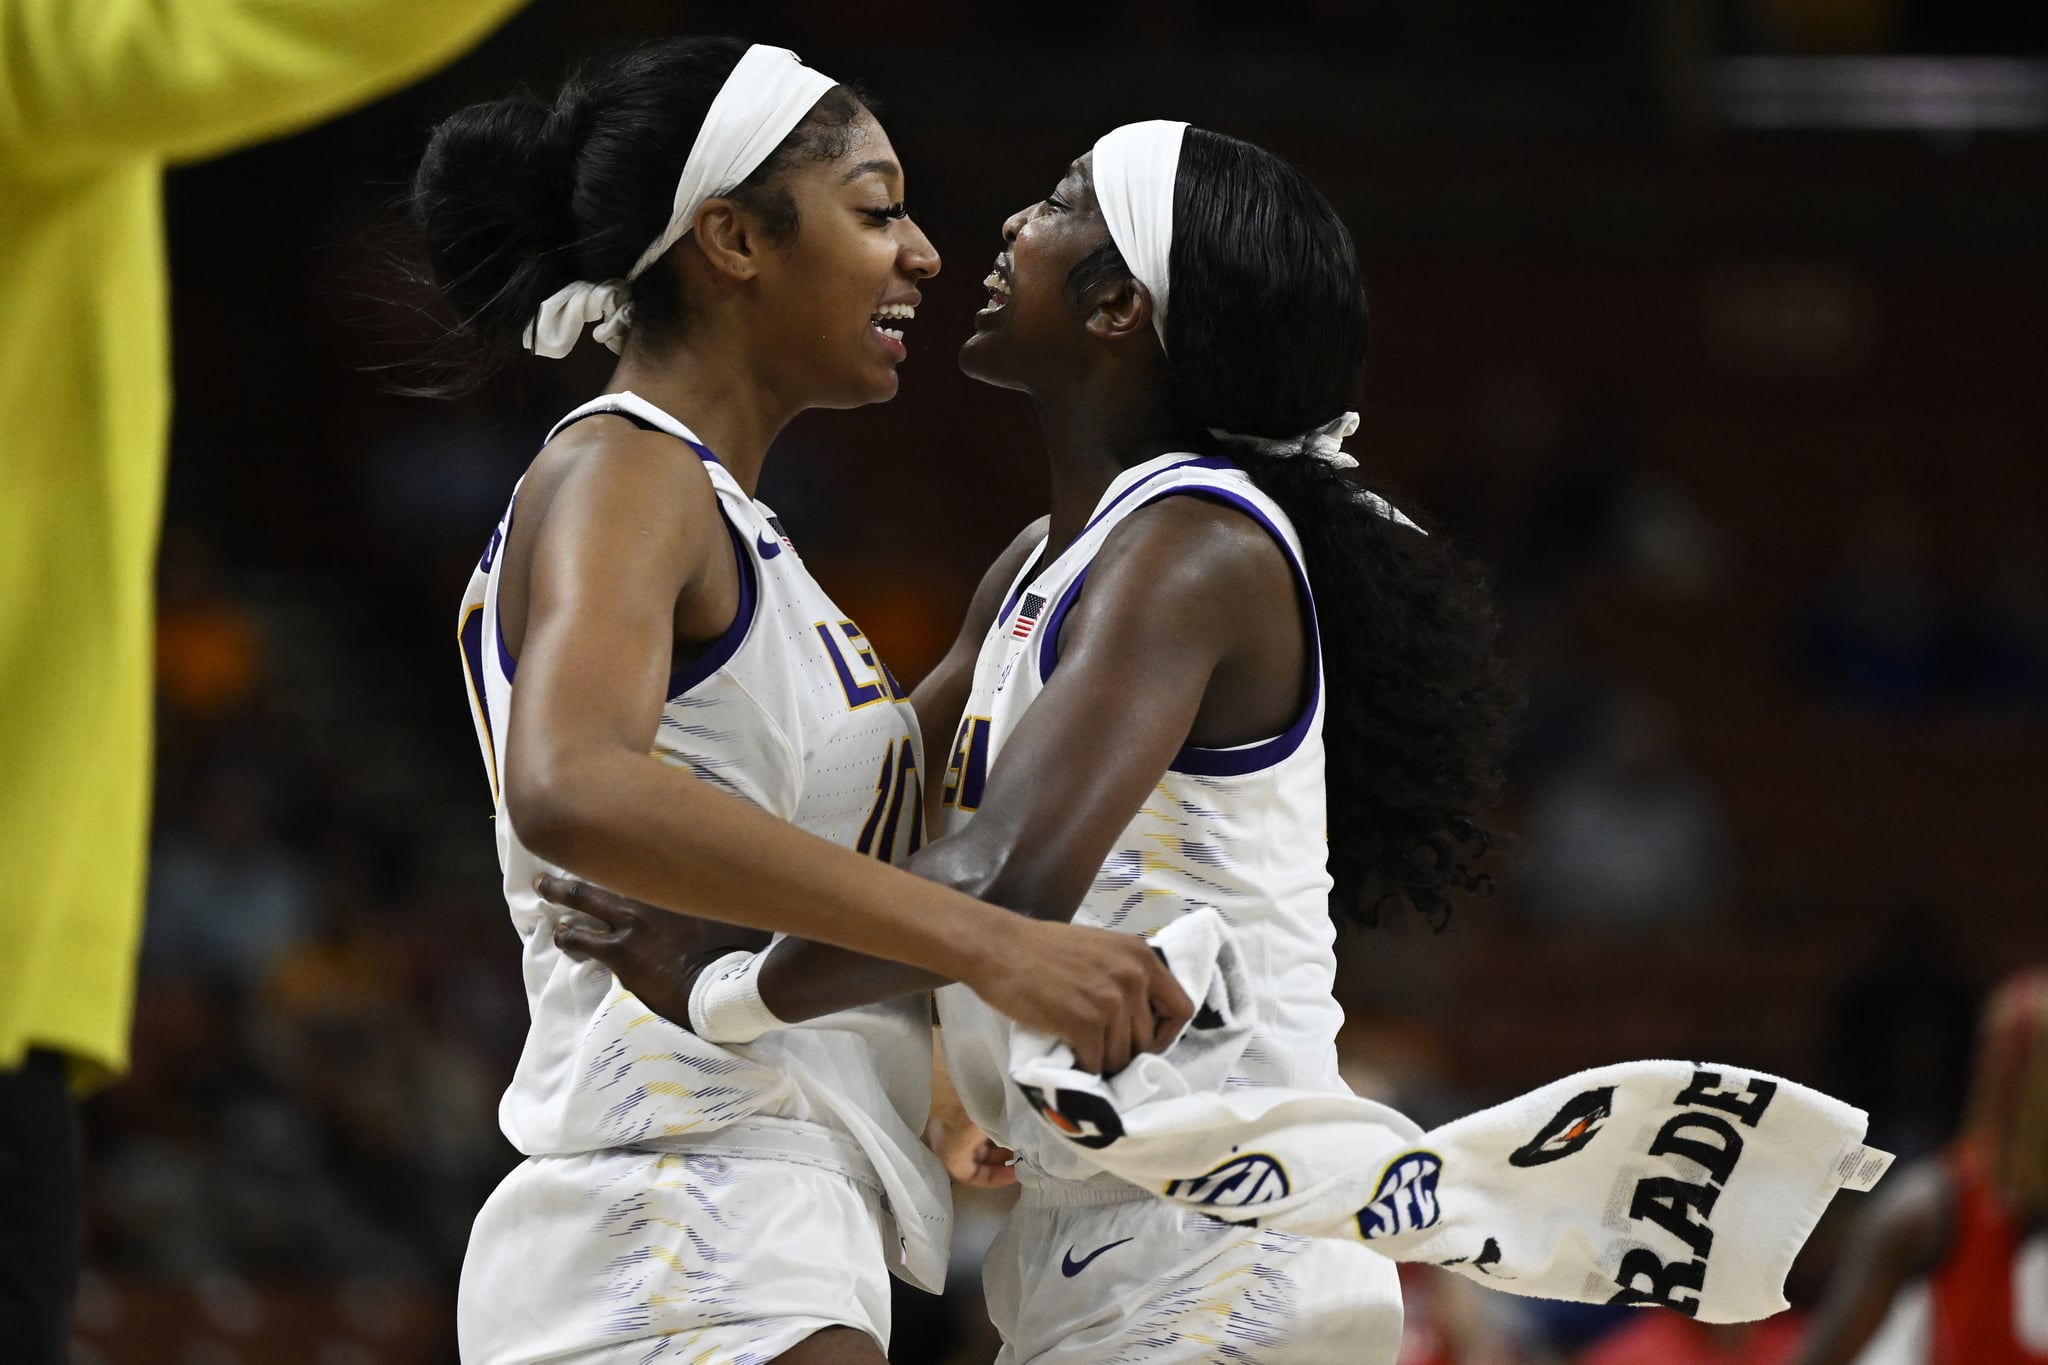 GREENVILLE, SOUTH CAROLINA - MARCH 03: Angel Reese #10 hugs Flau'jae Johnson #4 of the LSU Lady Tigers after her buzzer beater three point basket to end the third quarter during the quarterfinals of the SEC Women's Basketball Tournament at Bon Secours Wellness Arena on March 03, 2023 in Greenville, South Carolina. (Photo by Eakin Howard/Getty Images)